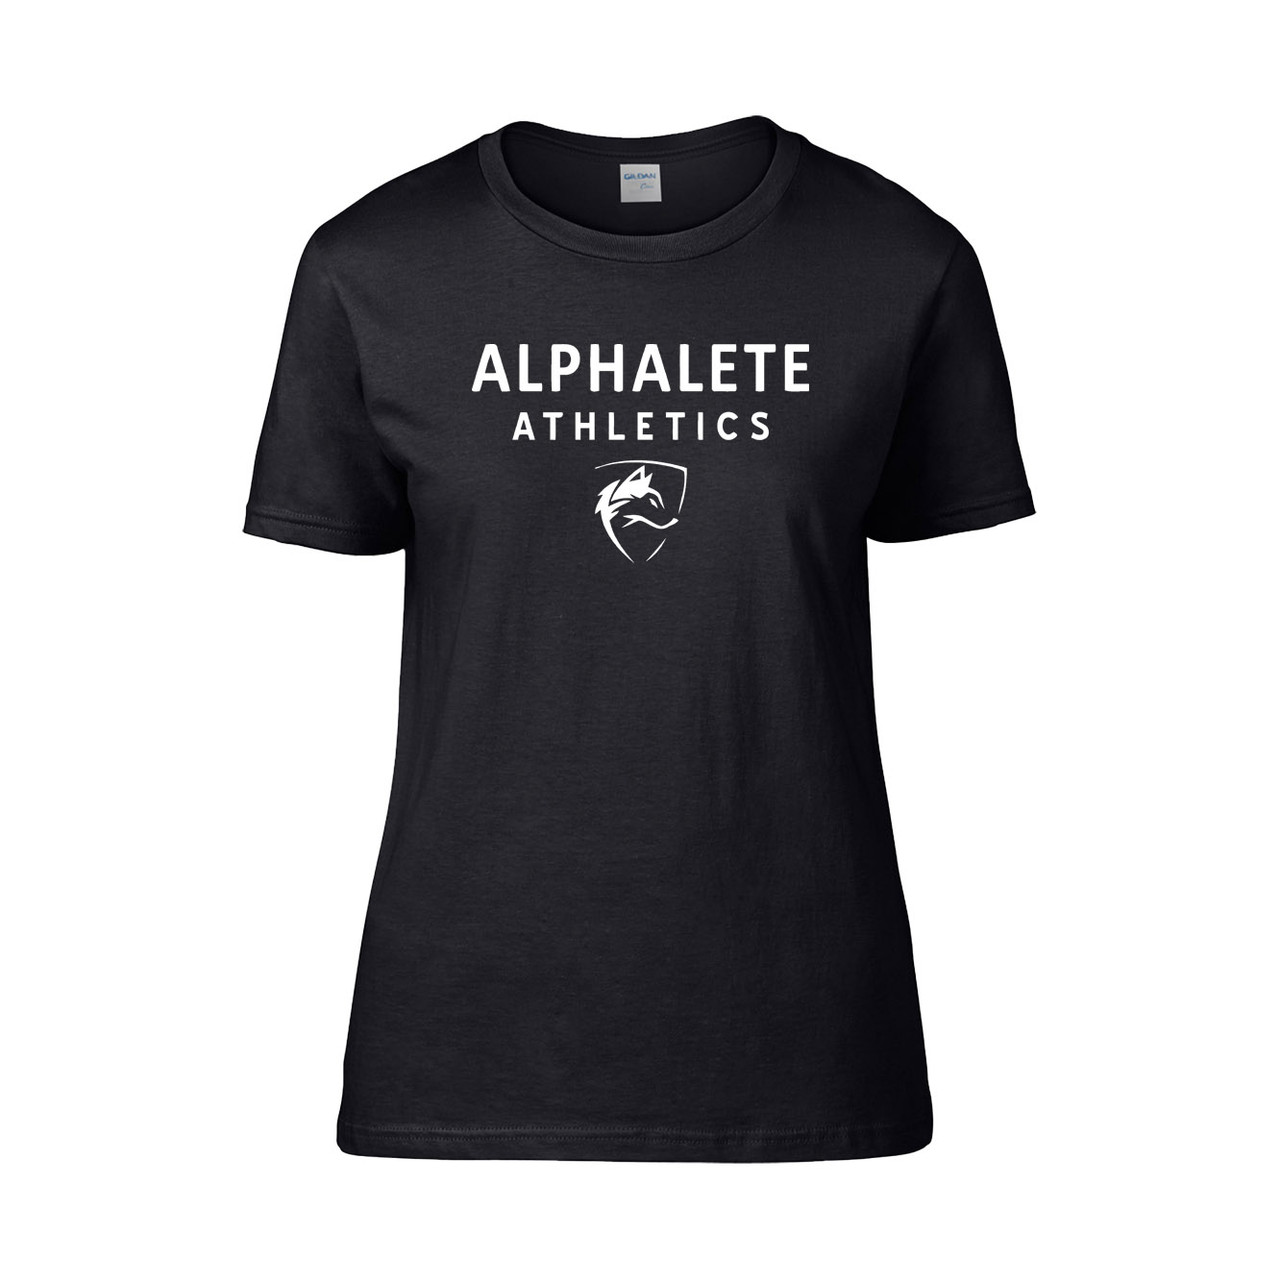 Alphalete Clothing Review and Sizing Guide 